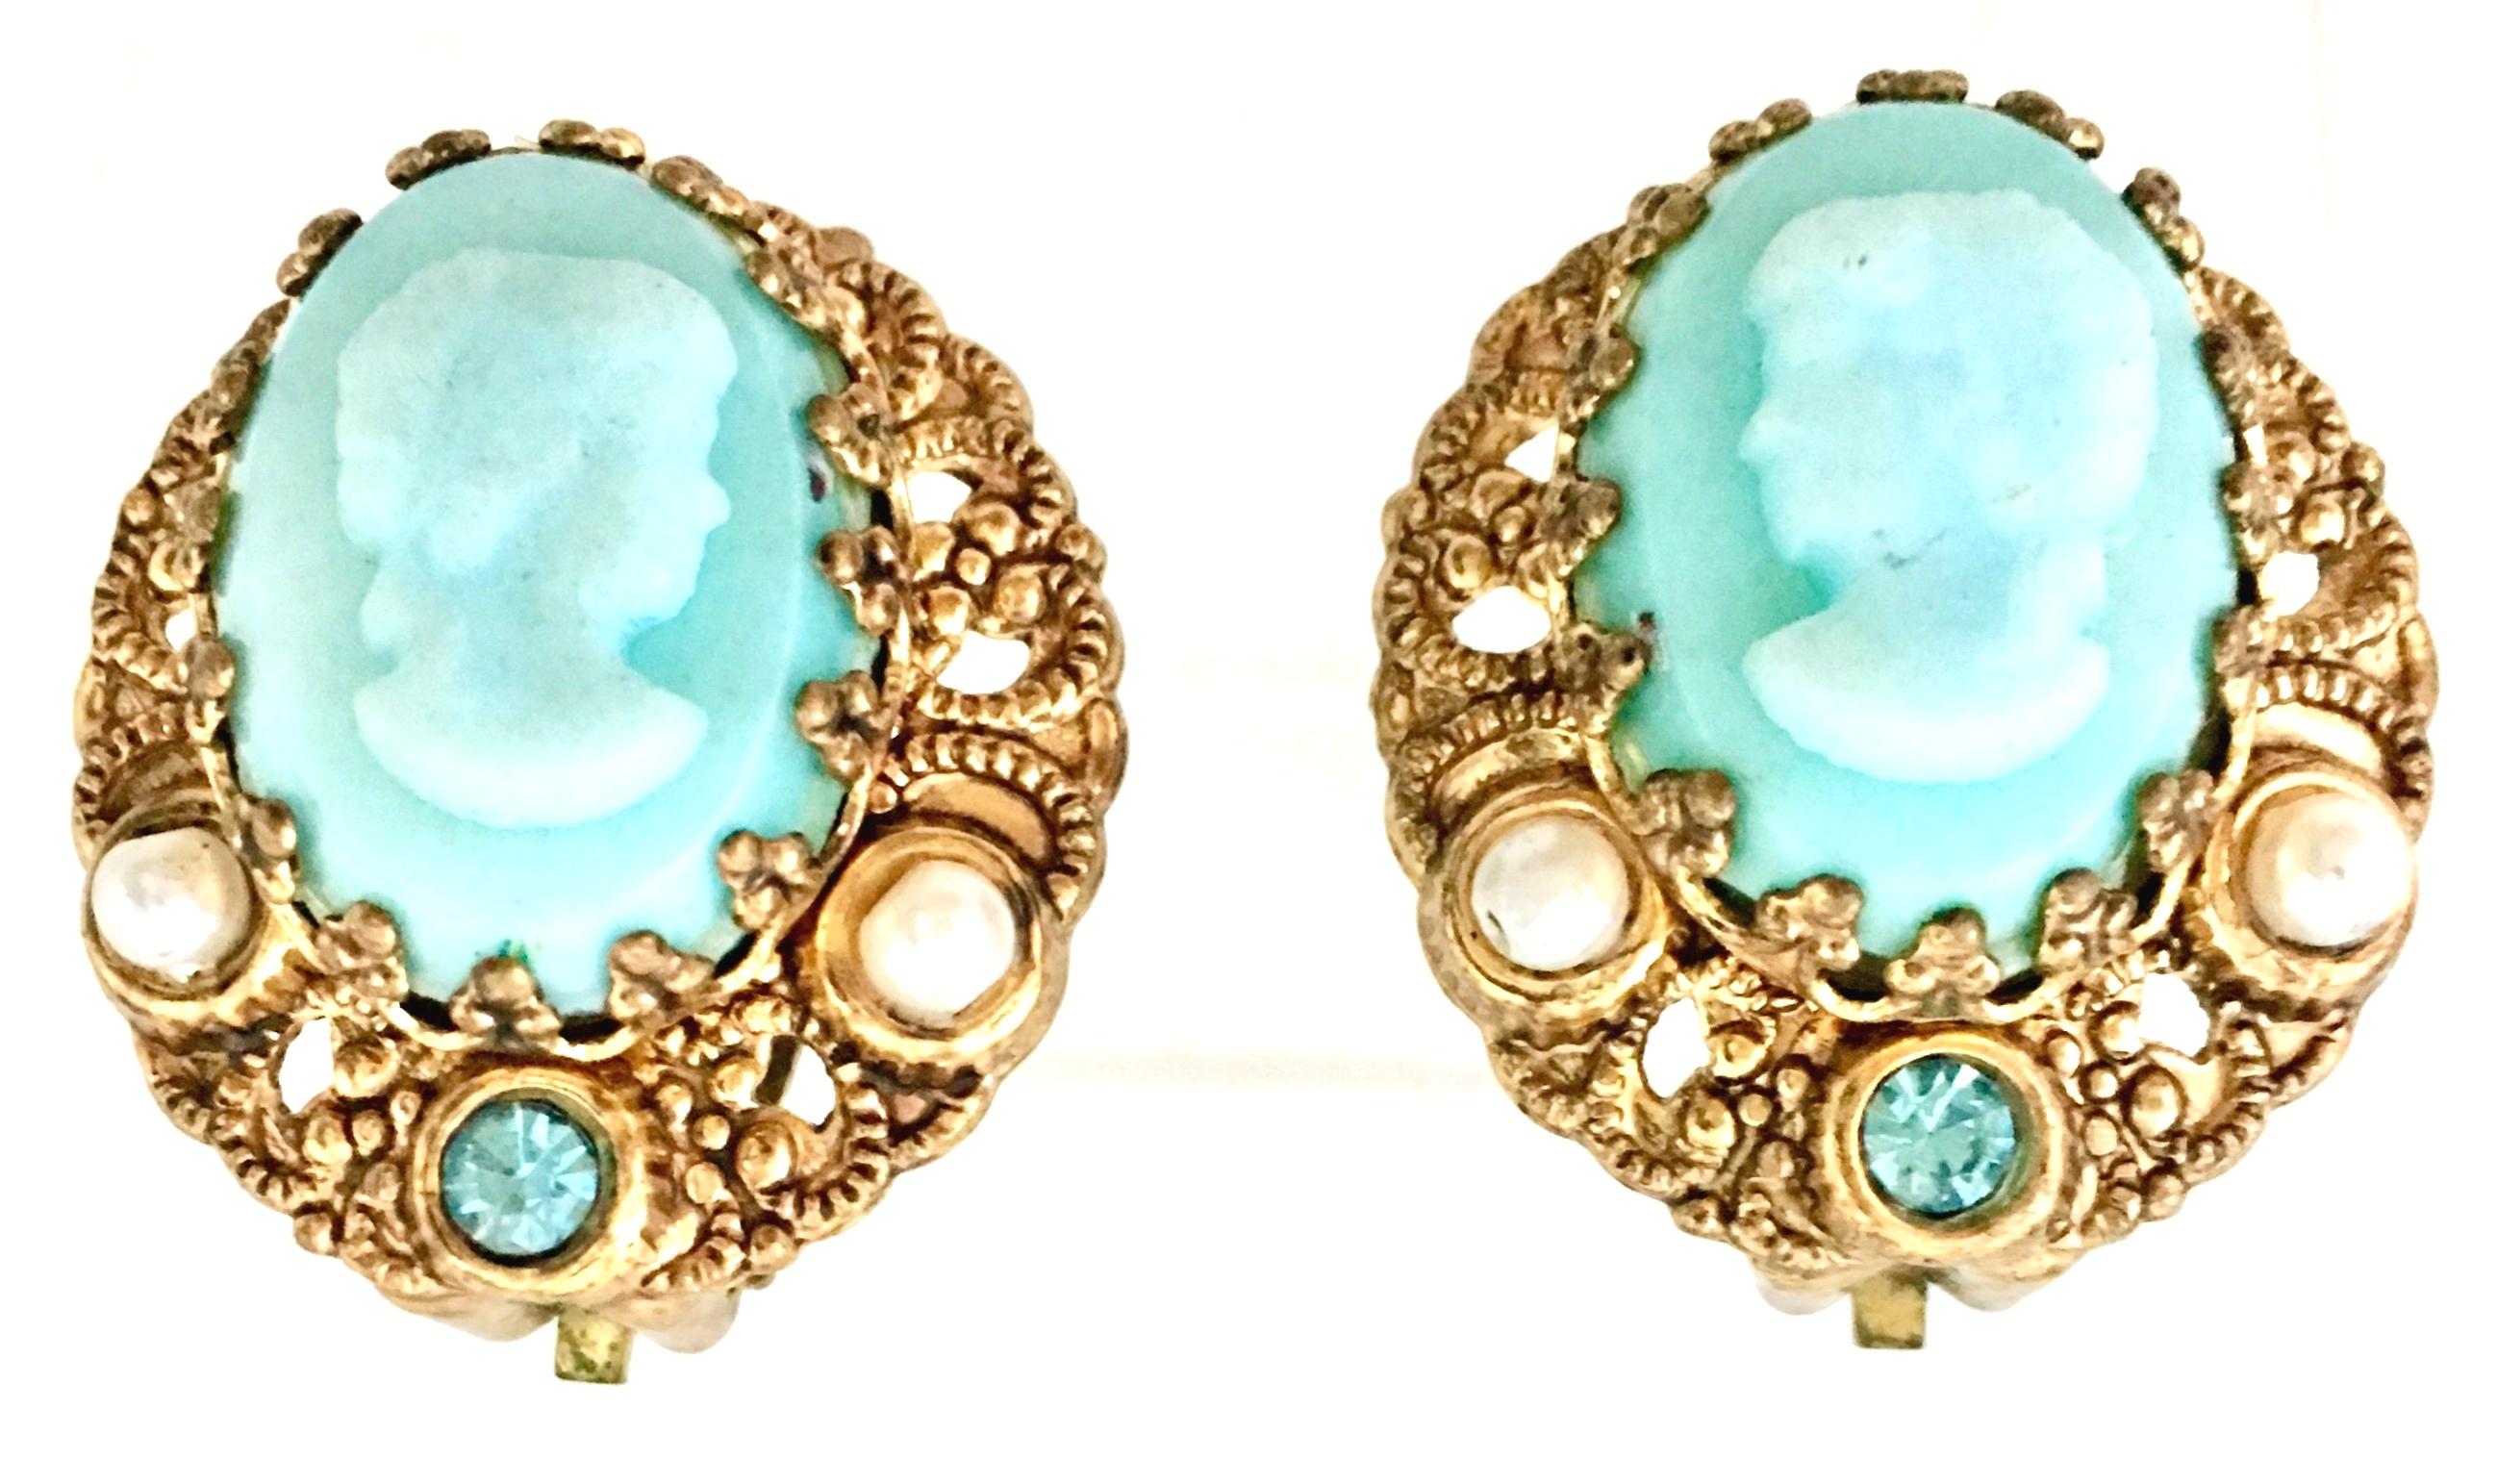 Victorian 1950'S Germany Gold Filigree Carved Blue Cameo Brooch & Earrings S/3